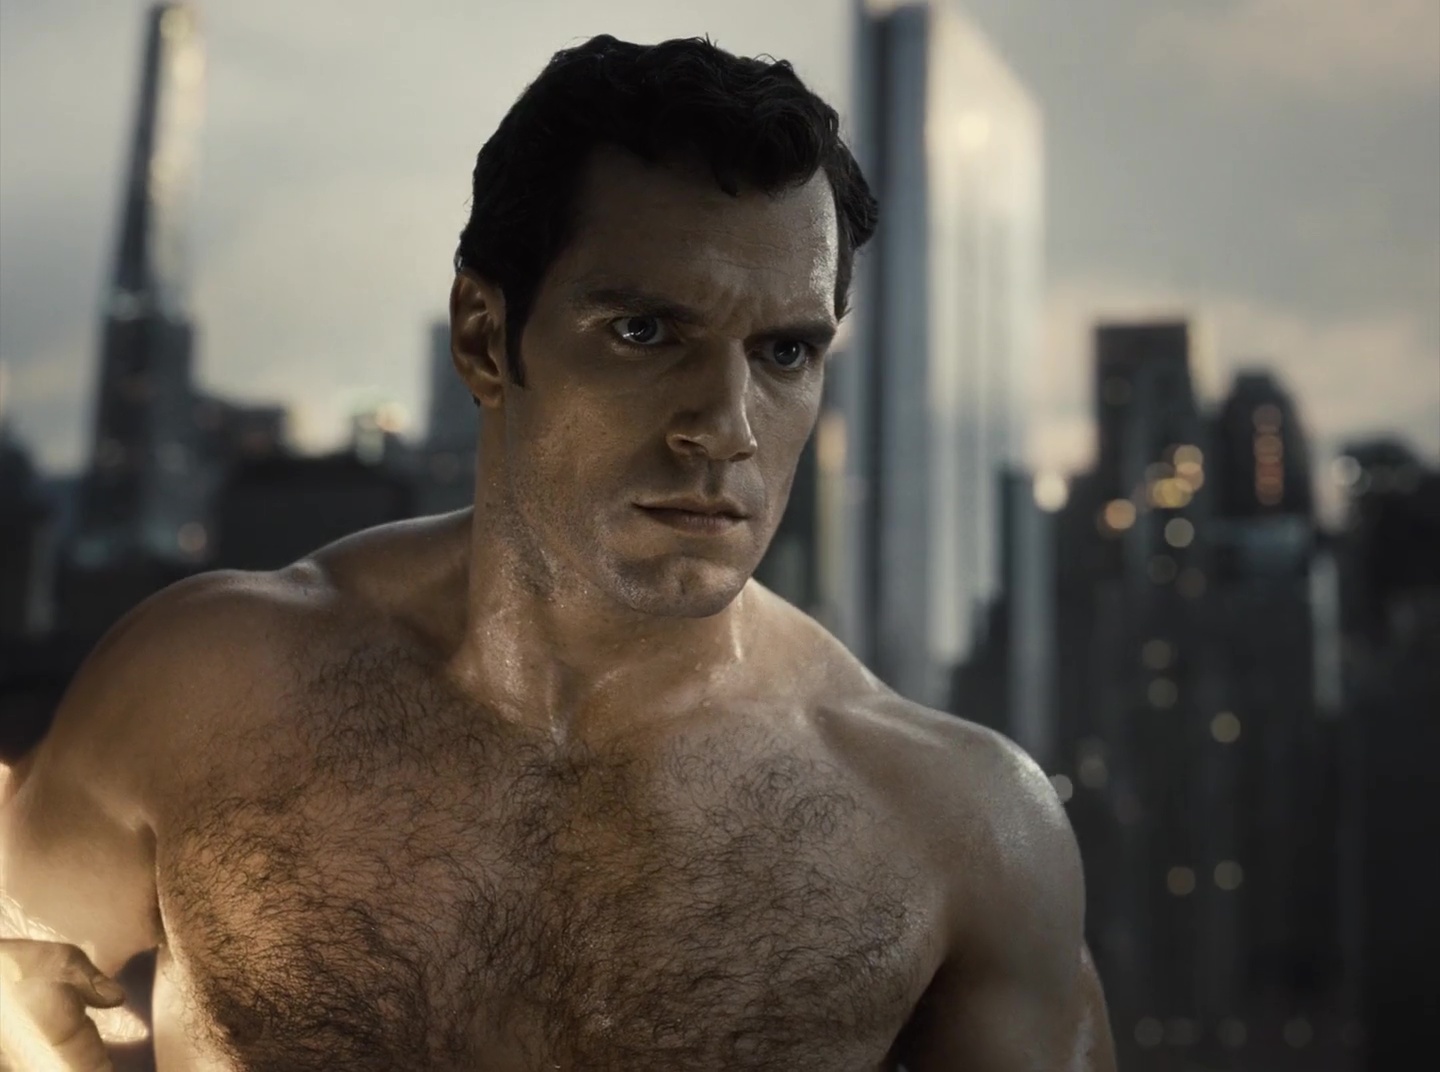 Auscaps Henry Cavill Shirtless In Zach Snyder S Justice League The Best Porn Website